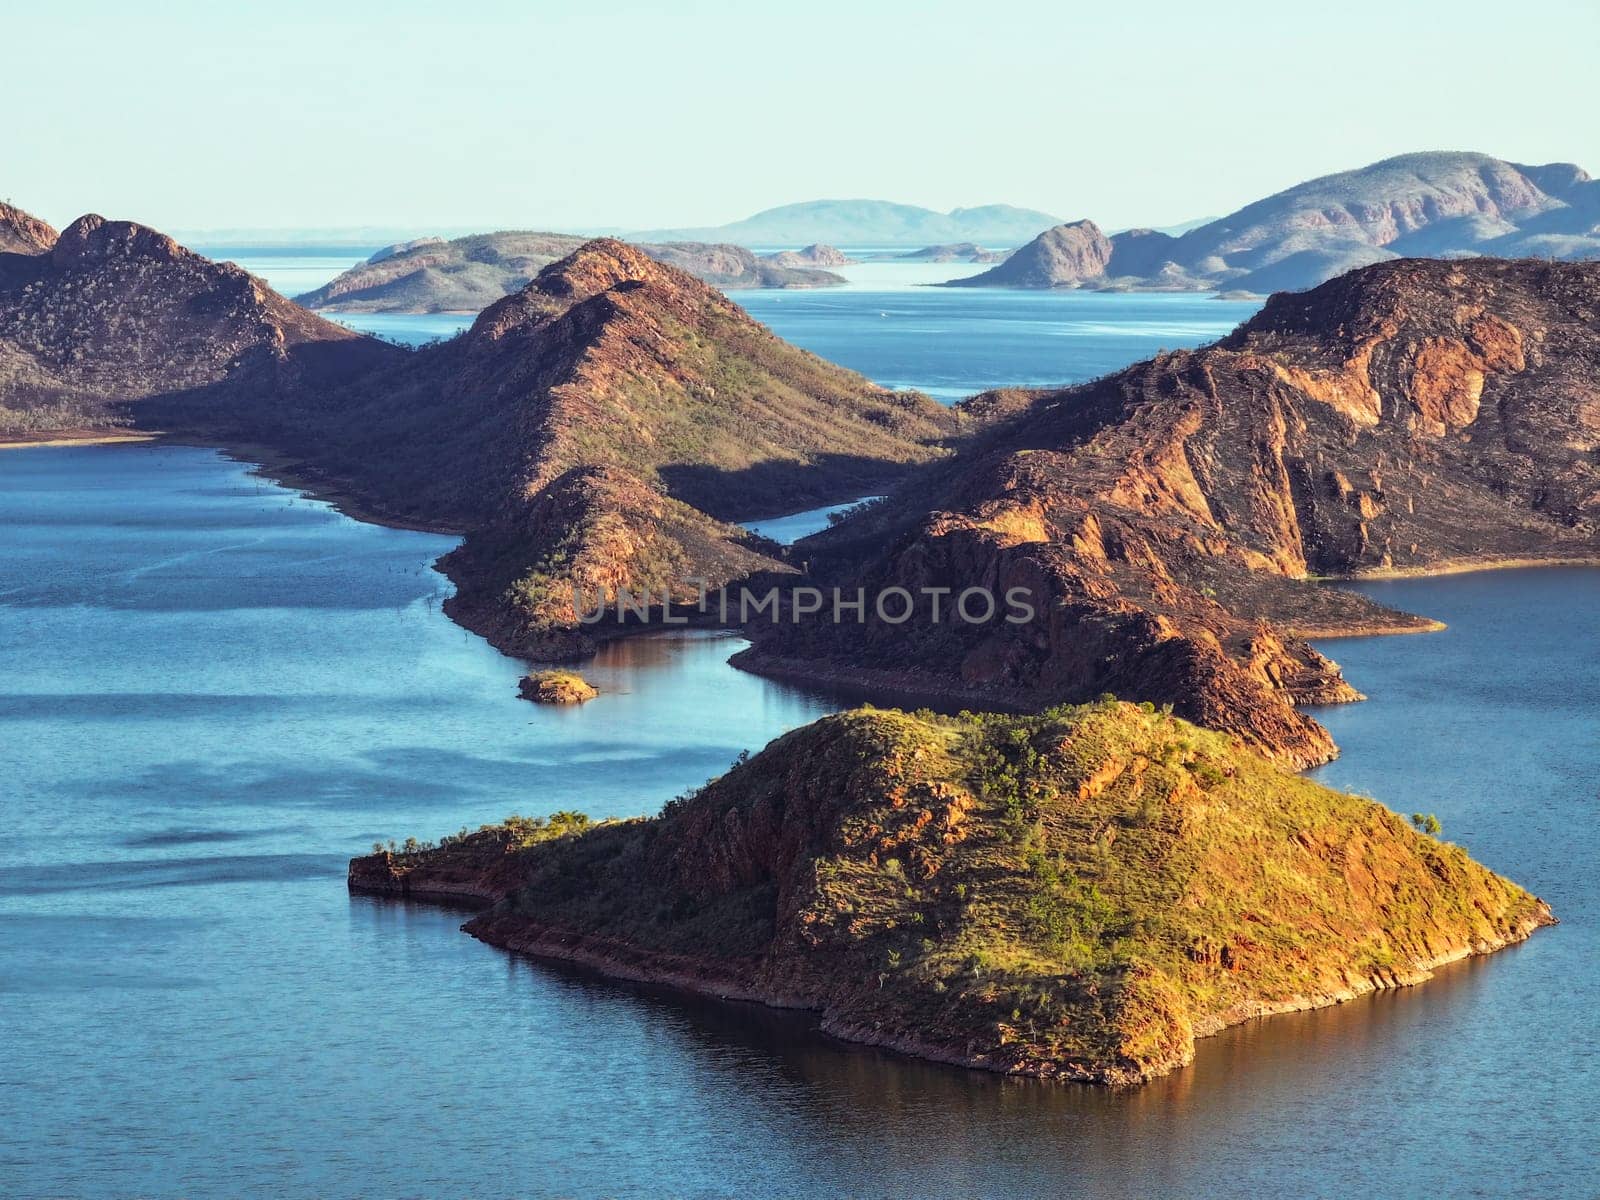 Lake Argyle, East Kimberley, Western Australia from above at sunset by StefanMal